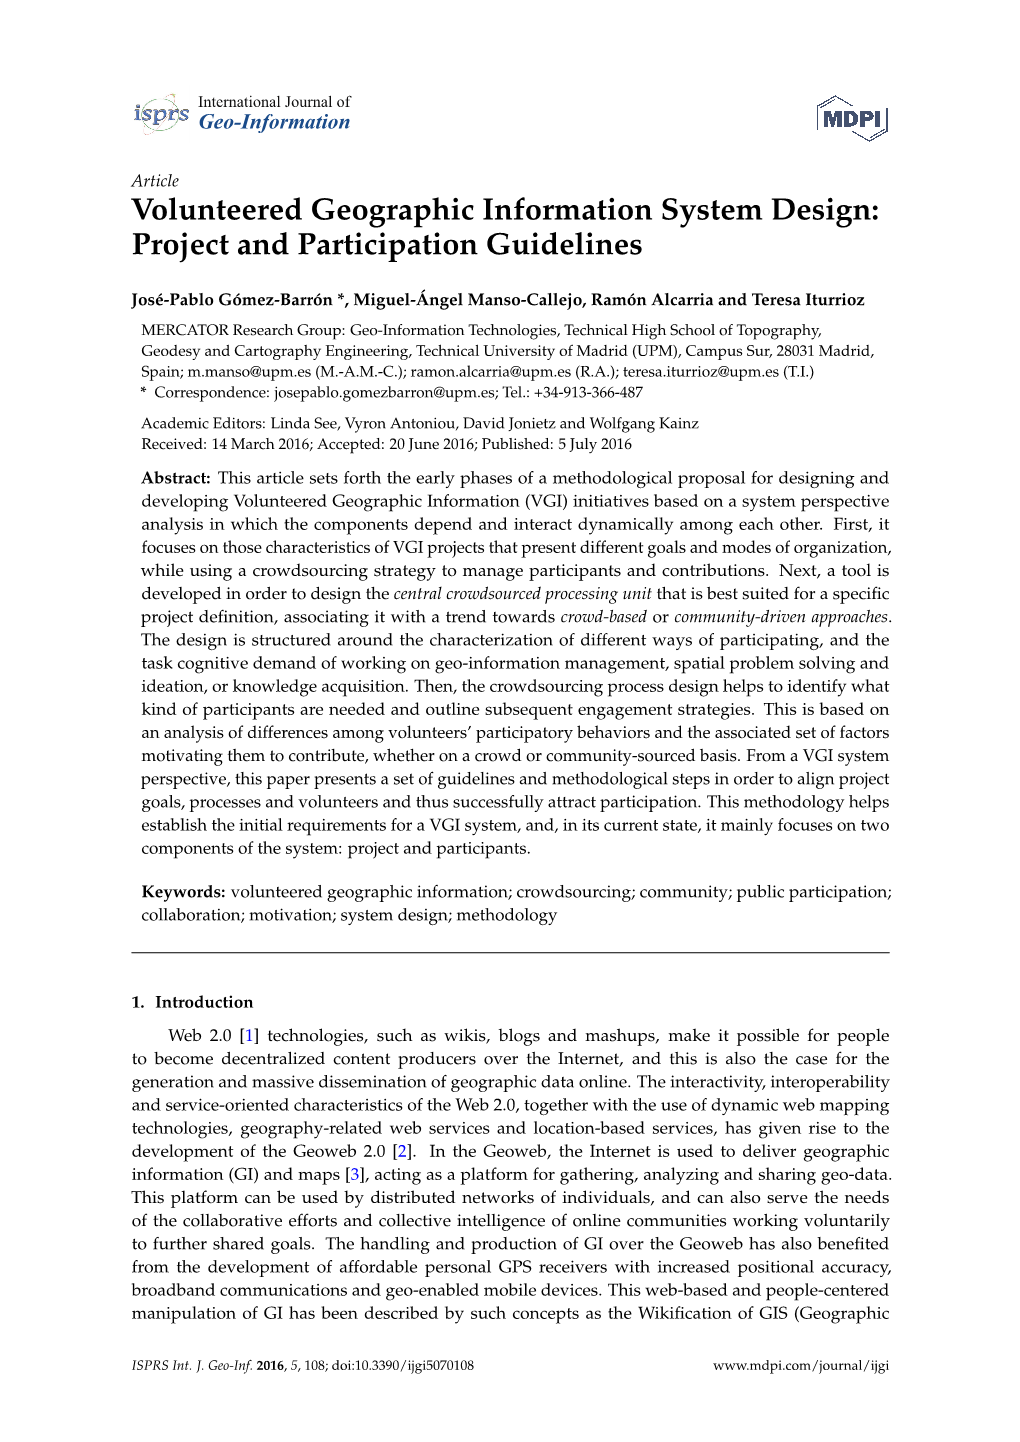 Volunteered Geographic Information System Design: Project and Participation Guidelines